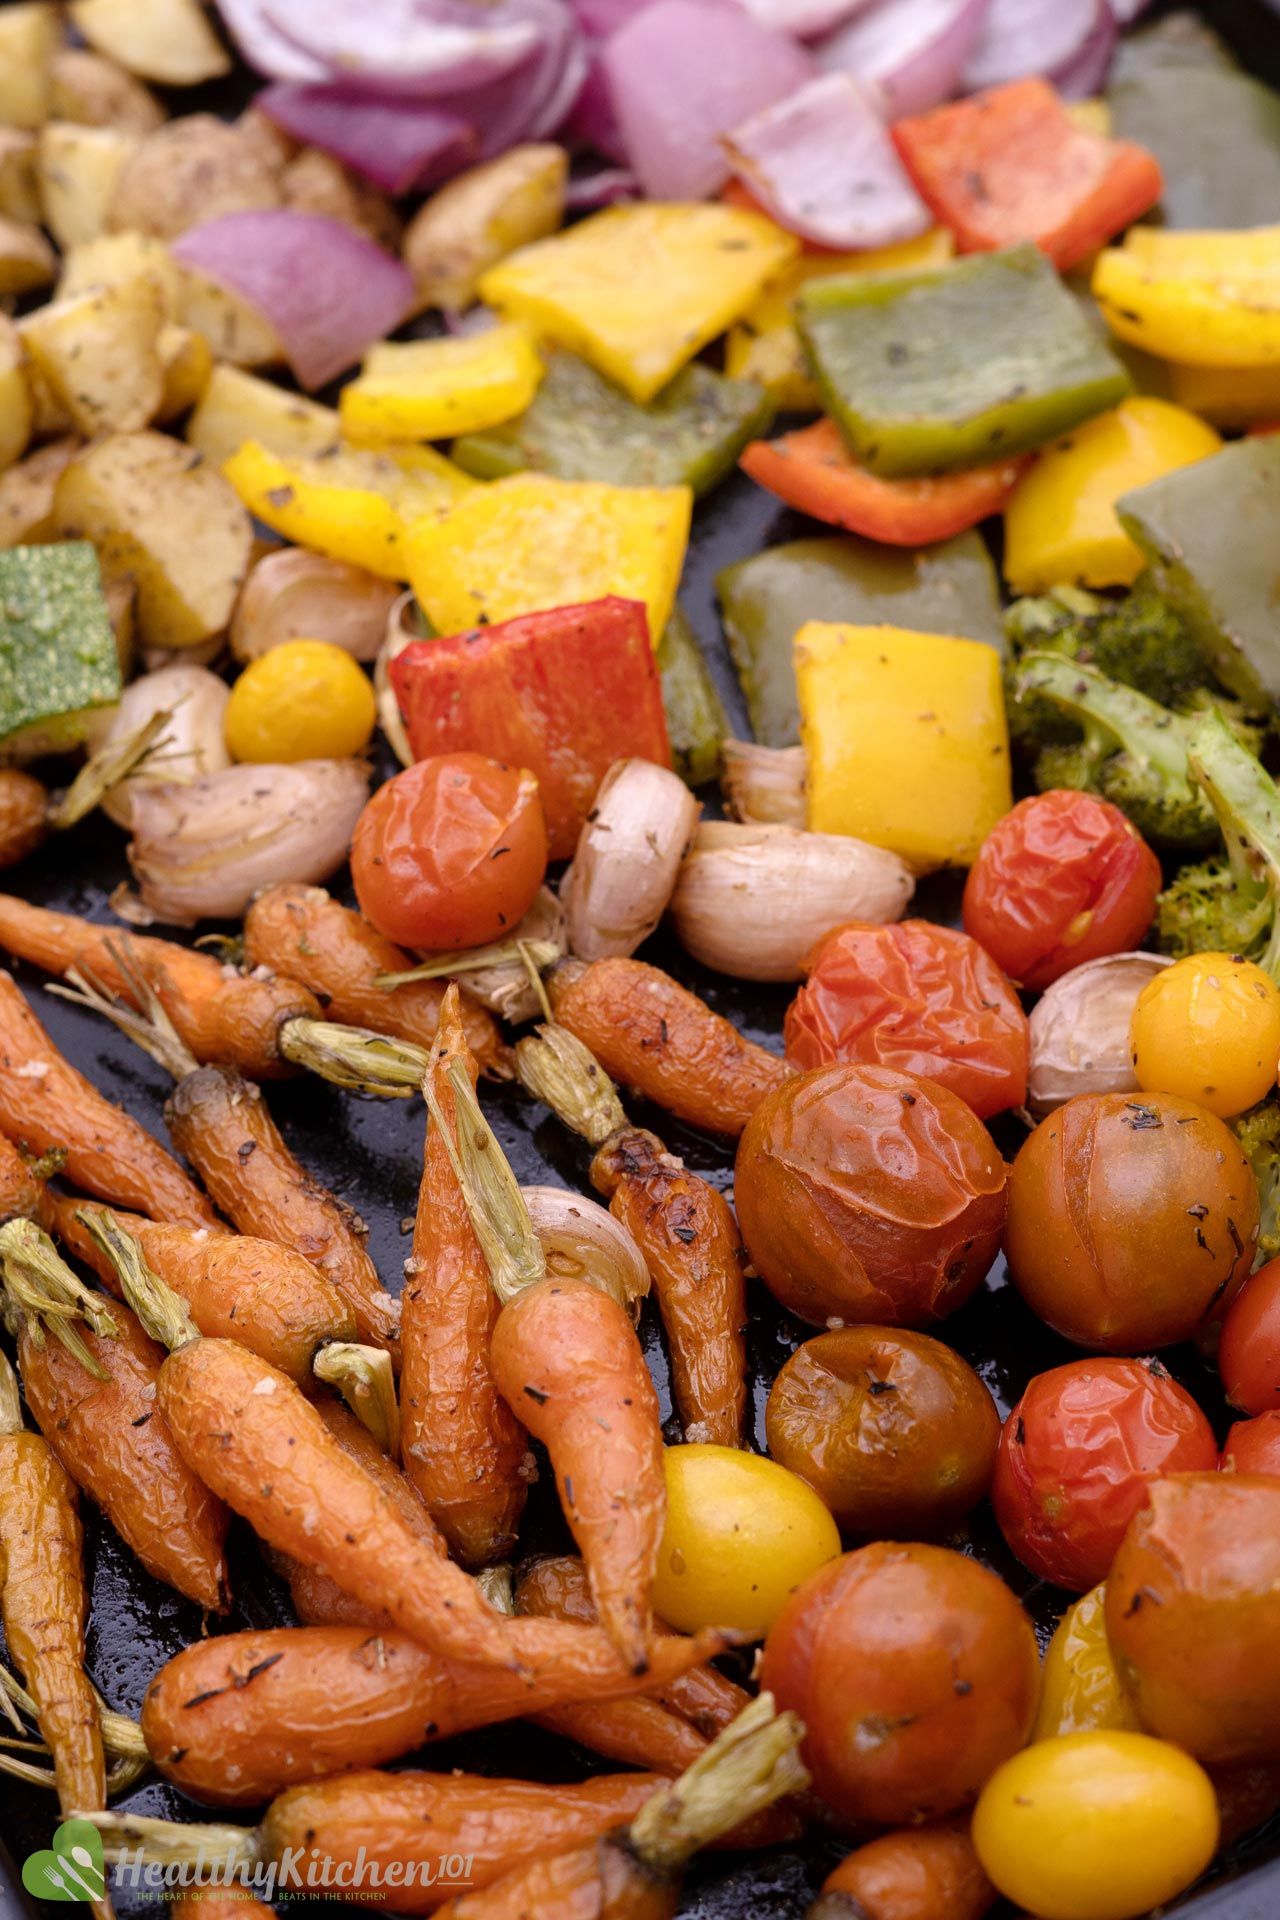 How to make roasted vegetables recipe